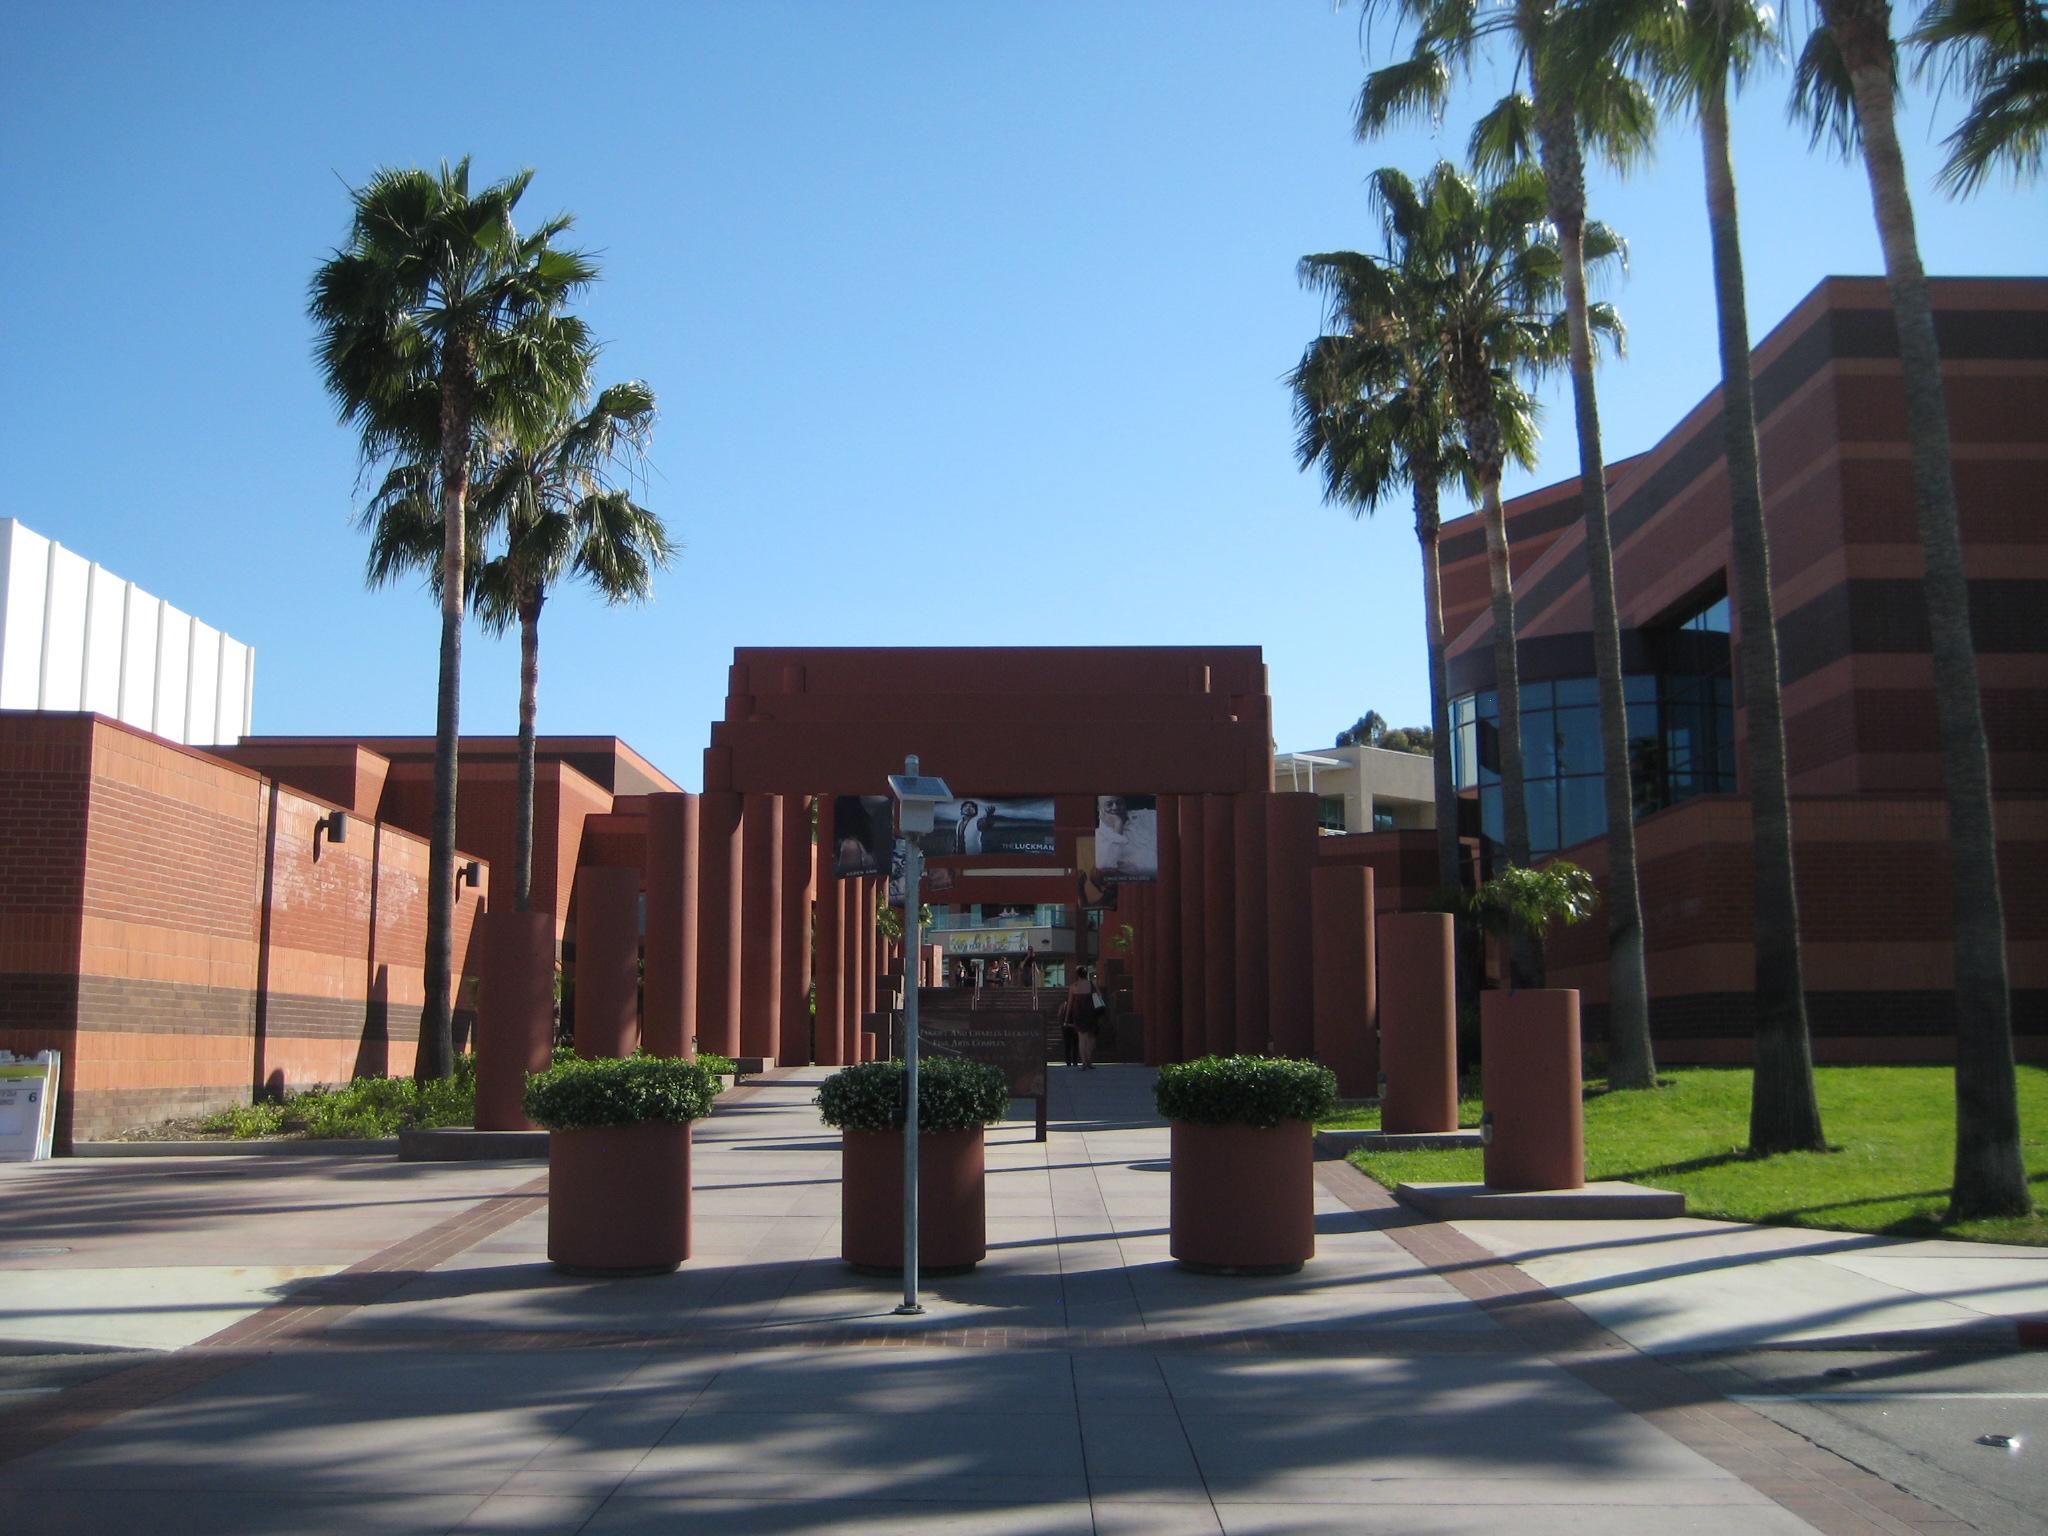 CSULA Administrator Threatens to Protest Santorum Lecture - Young